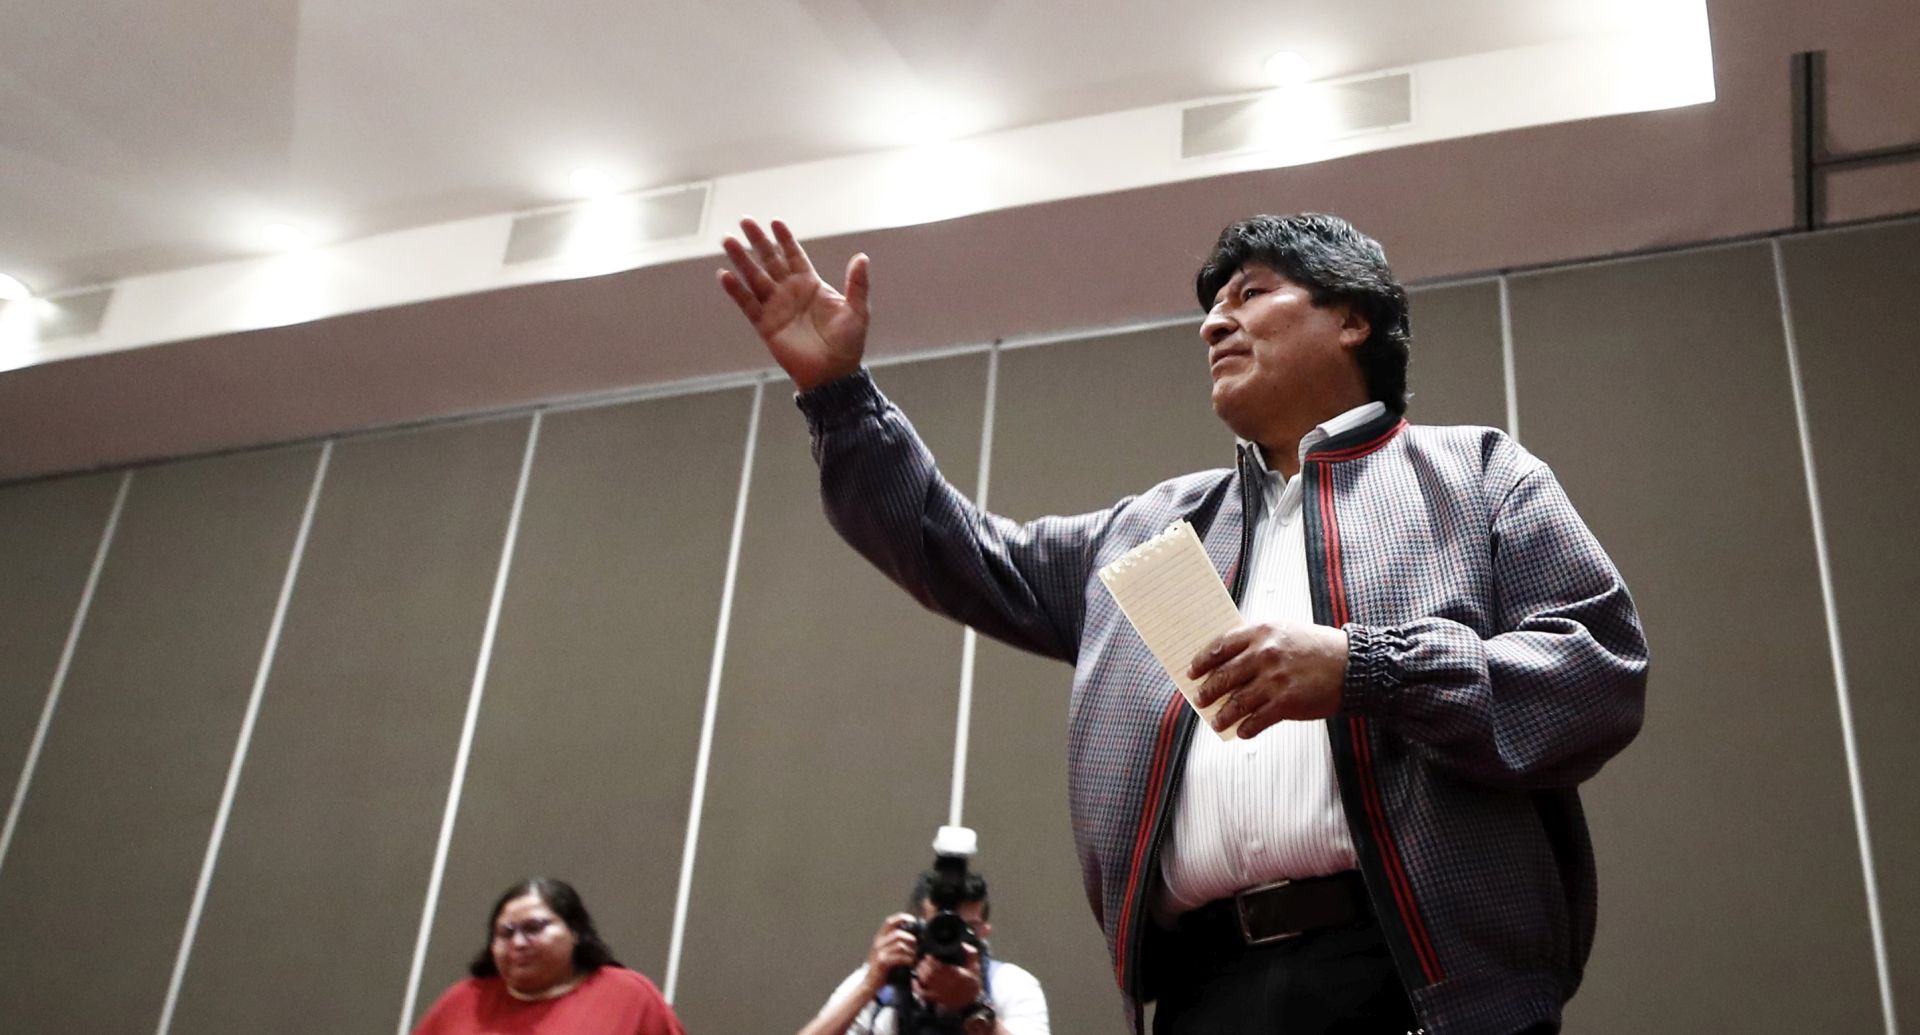 epa08011864 Former President of Bolivia Evo Morales (R), in asylum in Mexico, speaks during a press conference to report the deaths of Bolivian demonstrators, in Mexico city, Mexico, 20 November 2019. Morales presented to the press a video of Bolivian police action against demonstrators.  EPA/JOSE MENDEZ